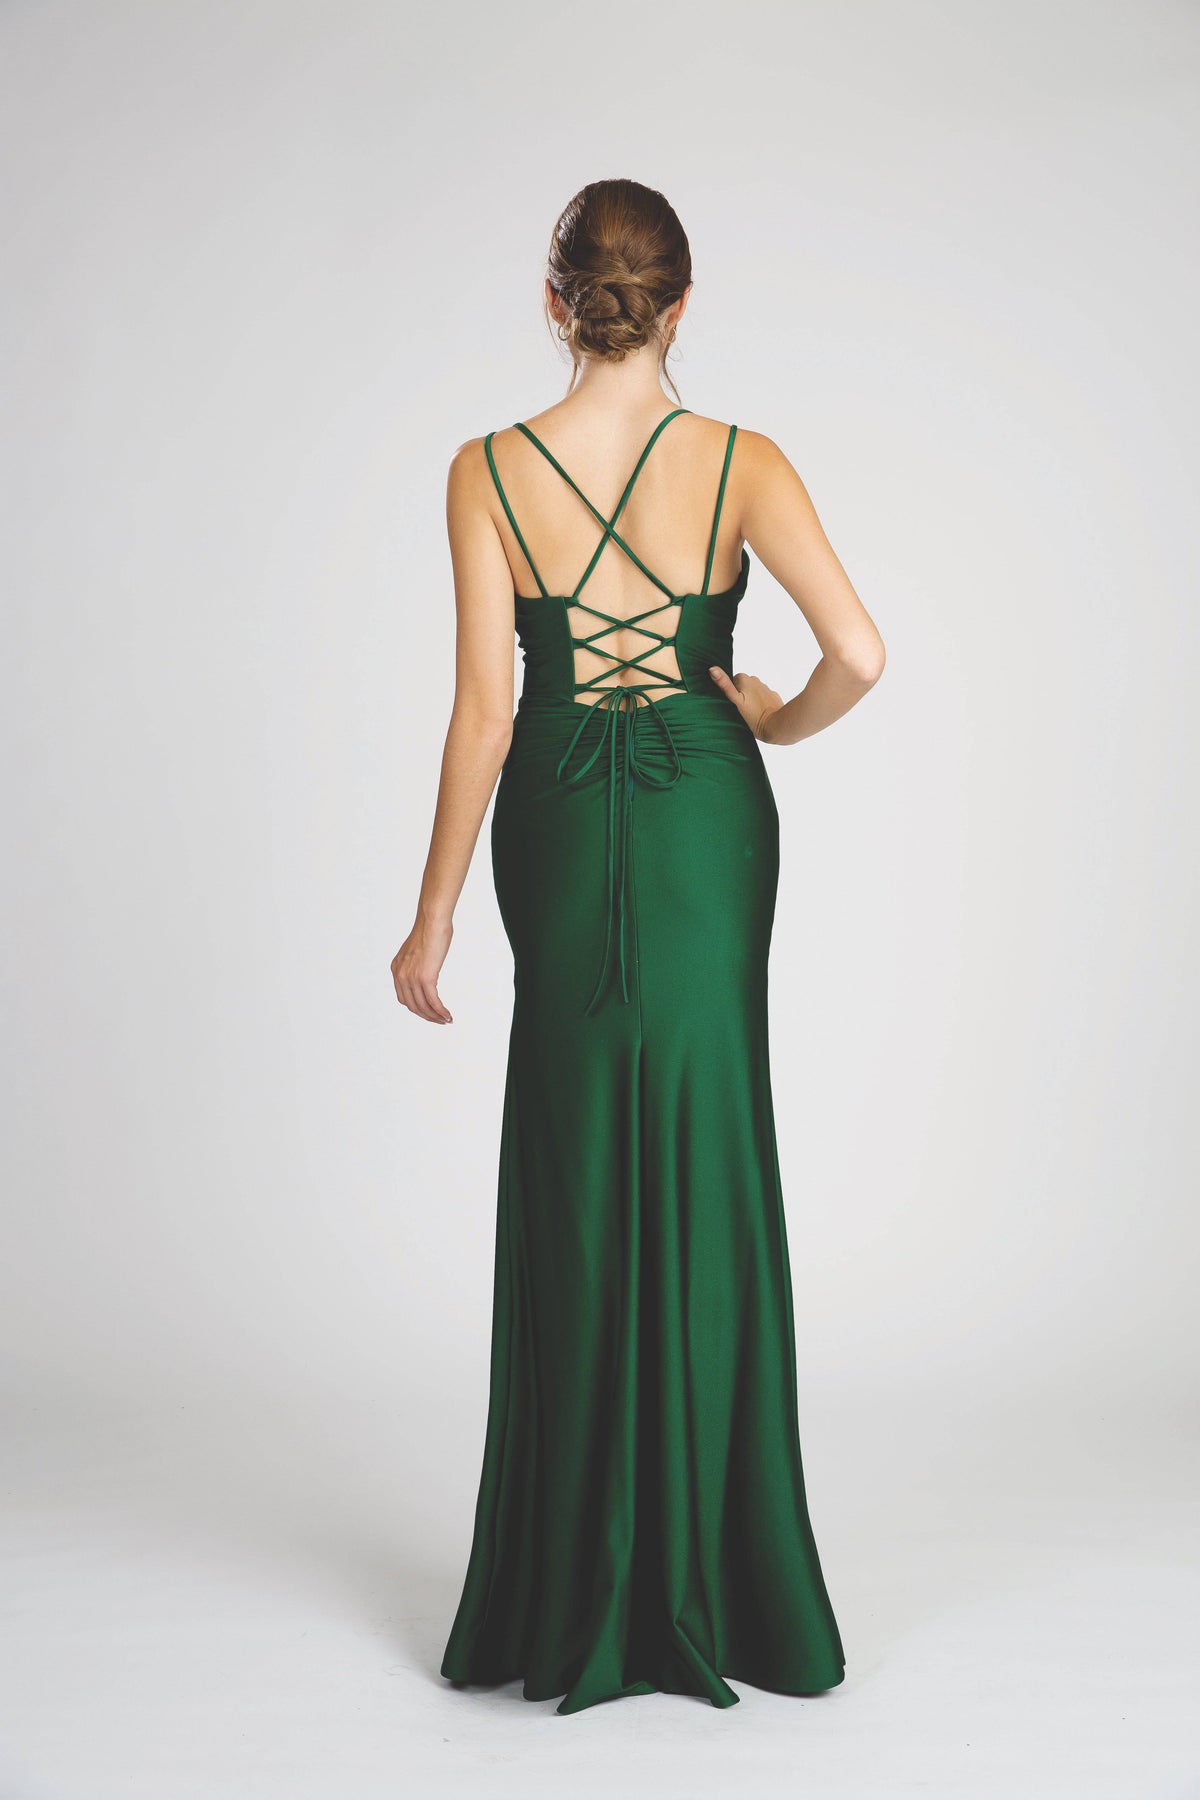 Fiesta 7238 High Slit Flowing Gown | 10 Colors - NORMA REED